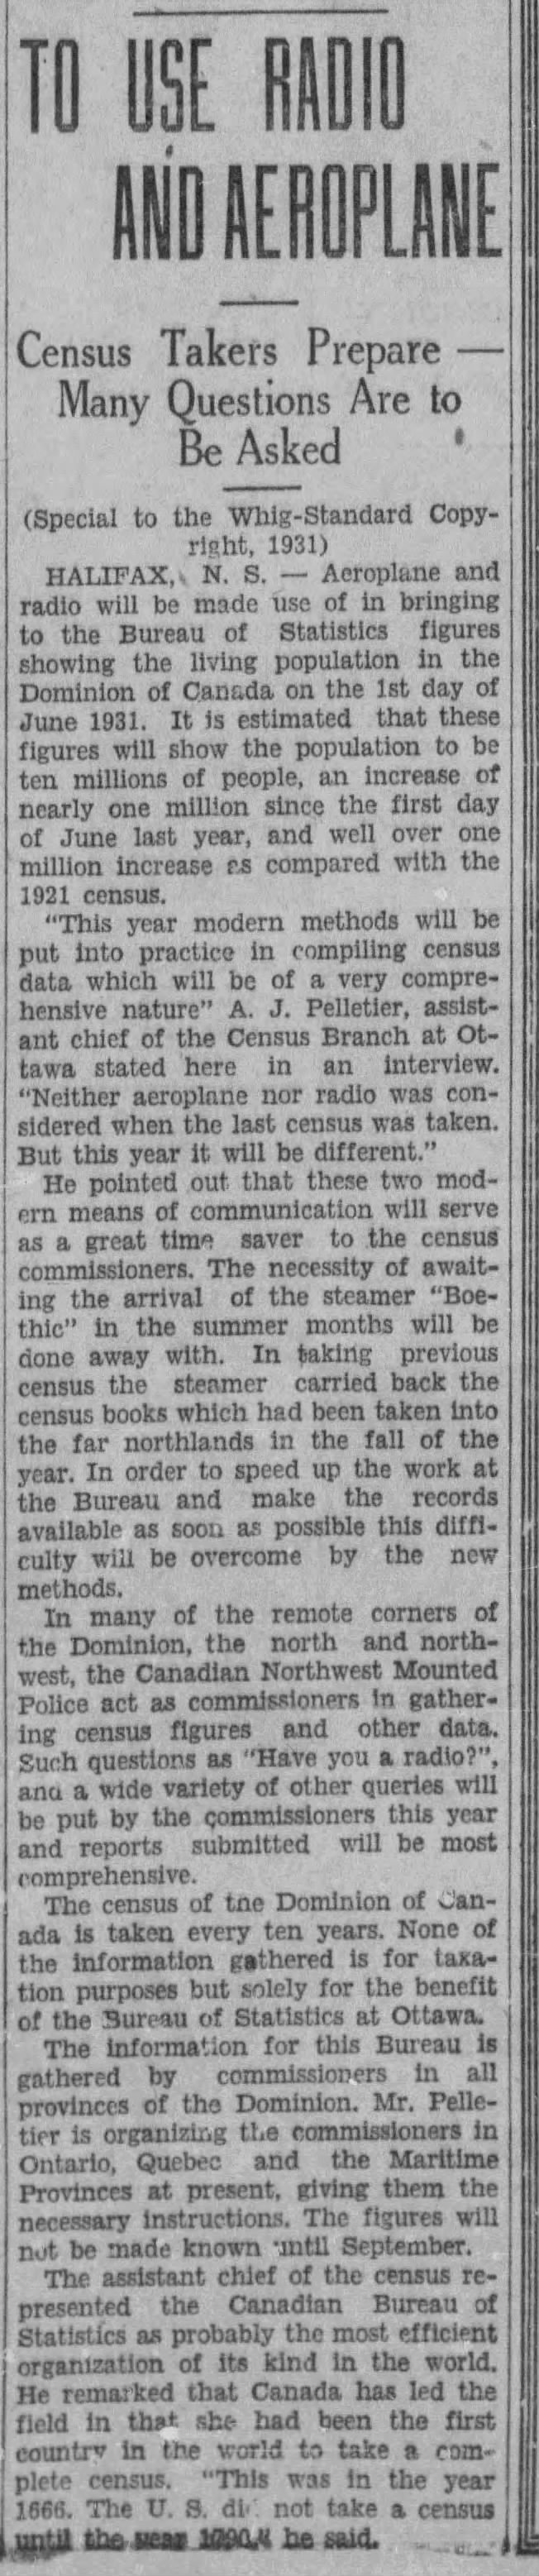 1931 Canadian Census to utilize airplanes and radios to gather results 